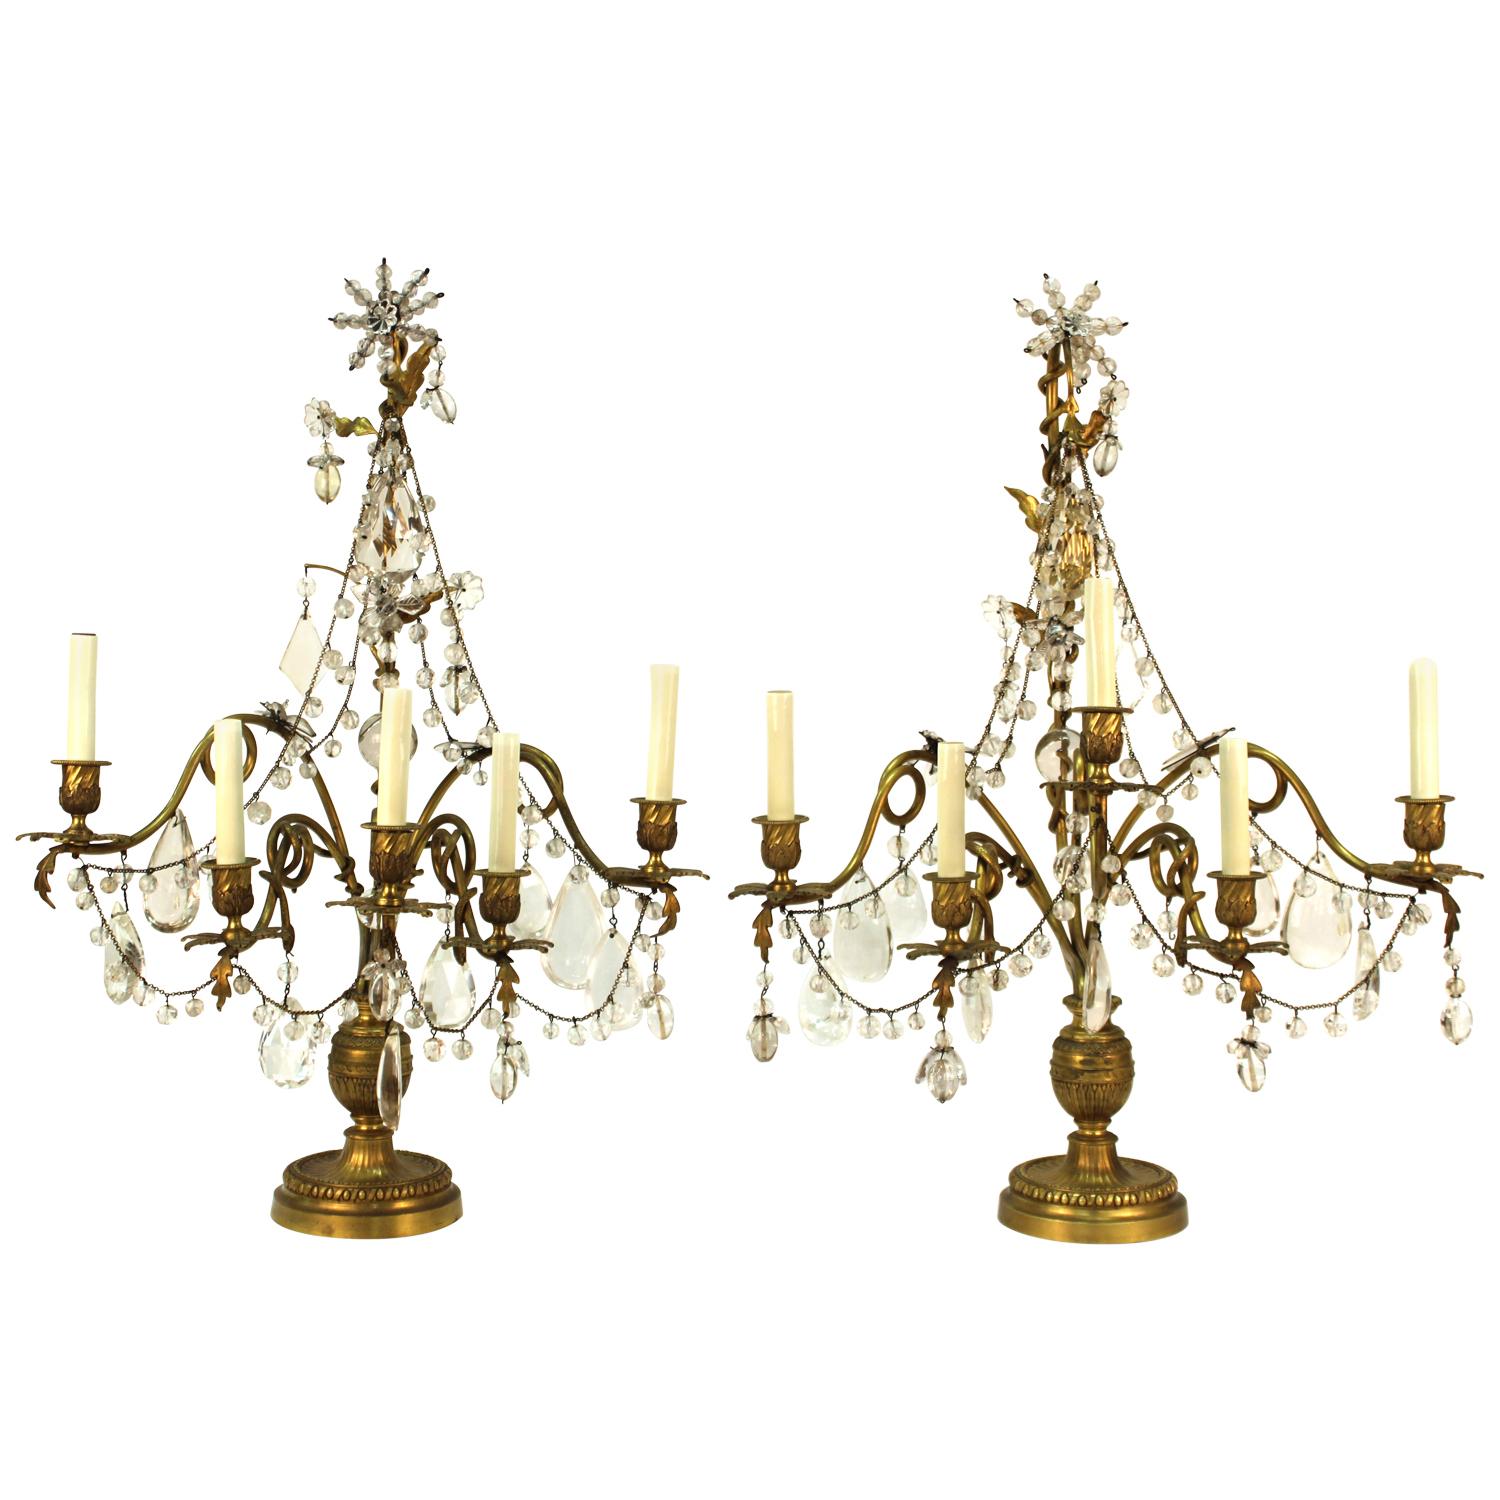 Rococo Style Bronze Girandole Table Lamps with Snakes and Crystals